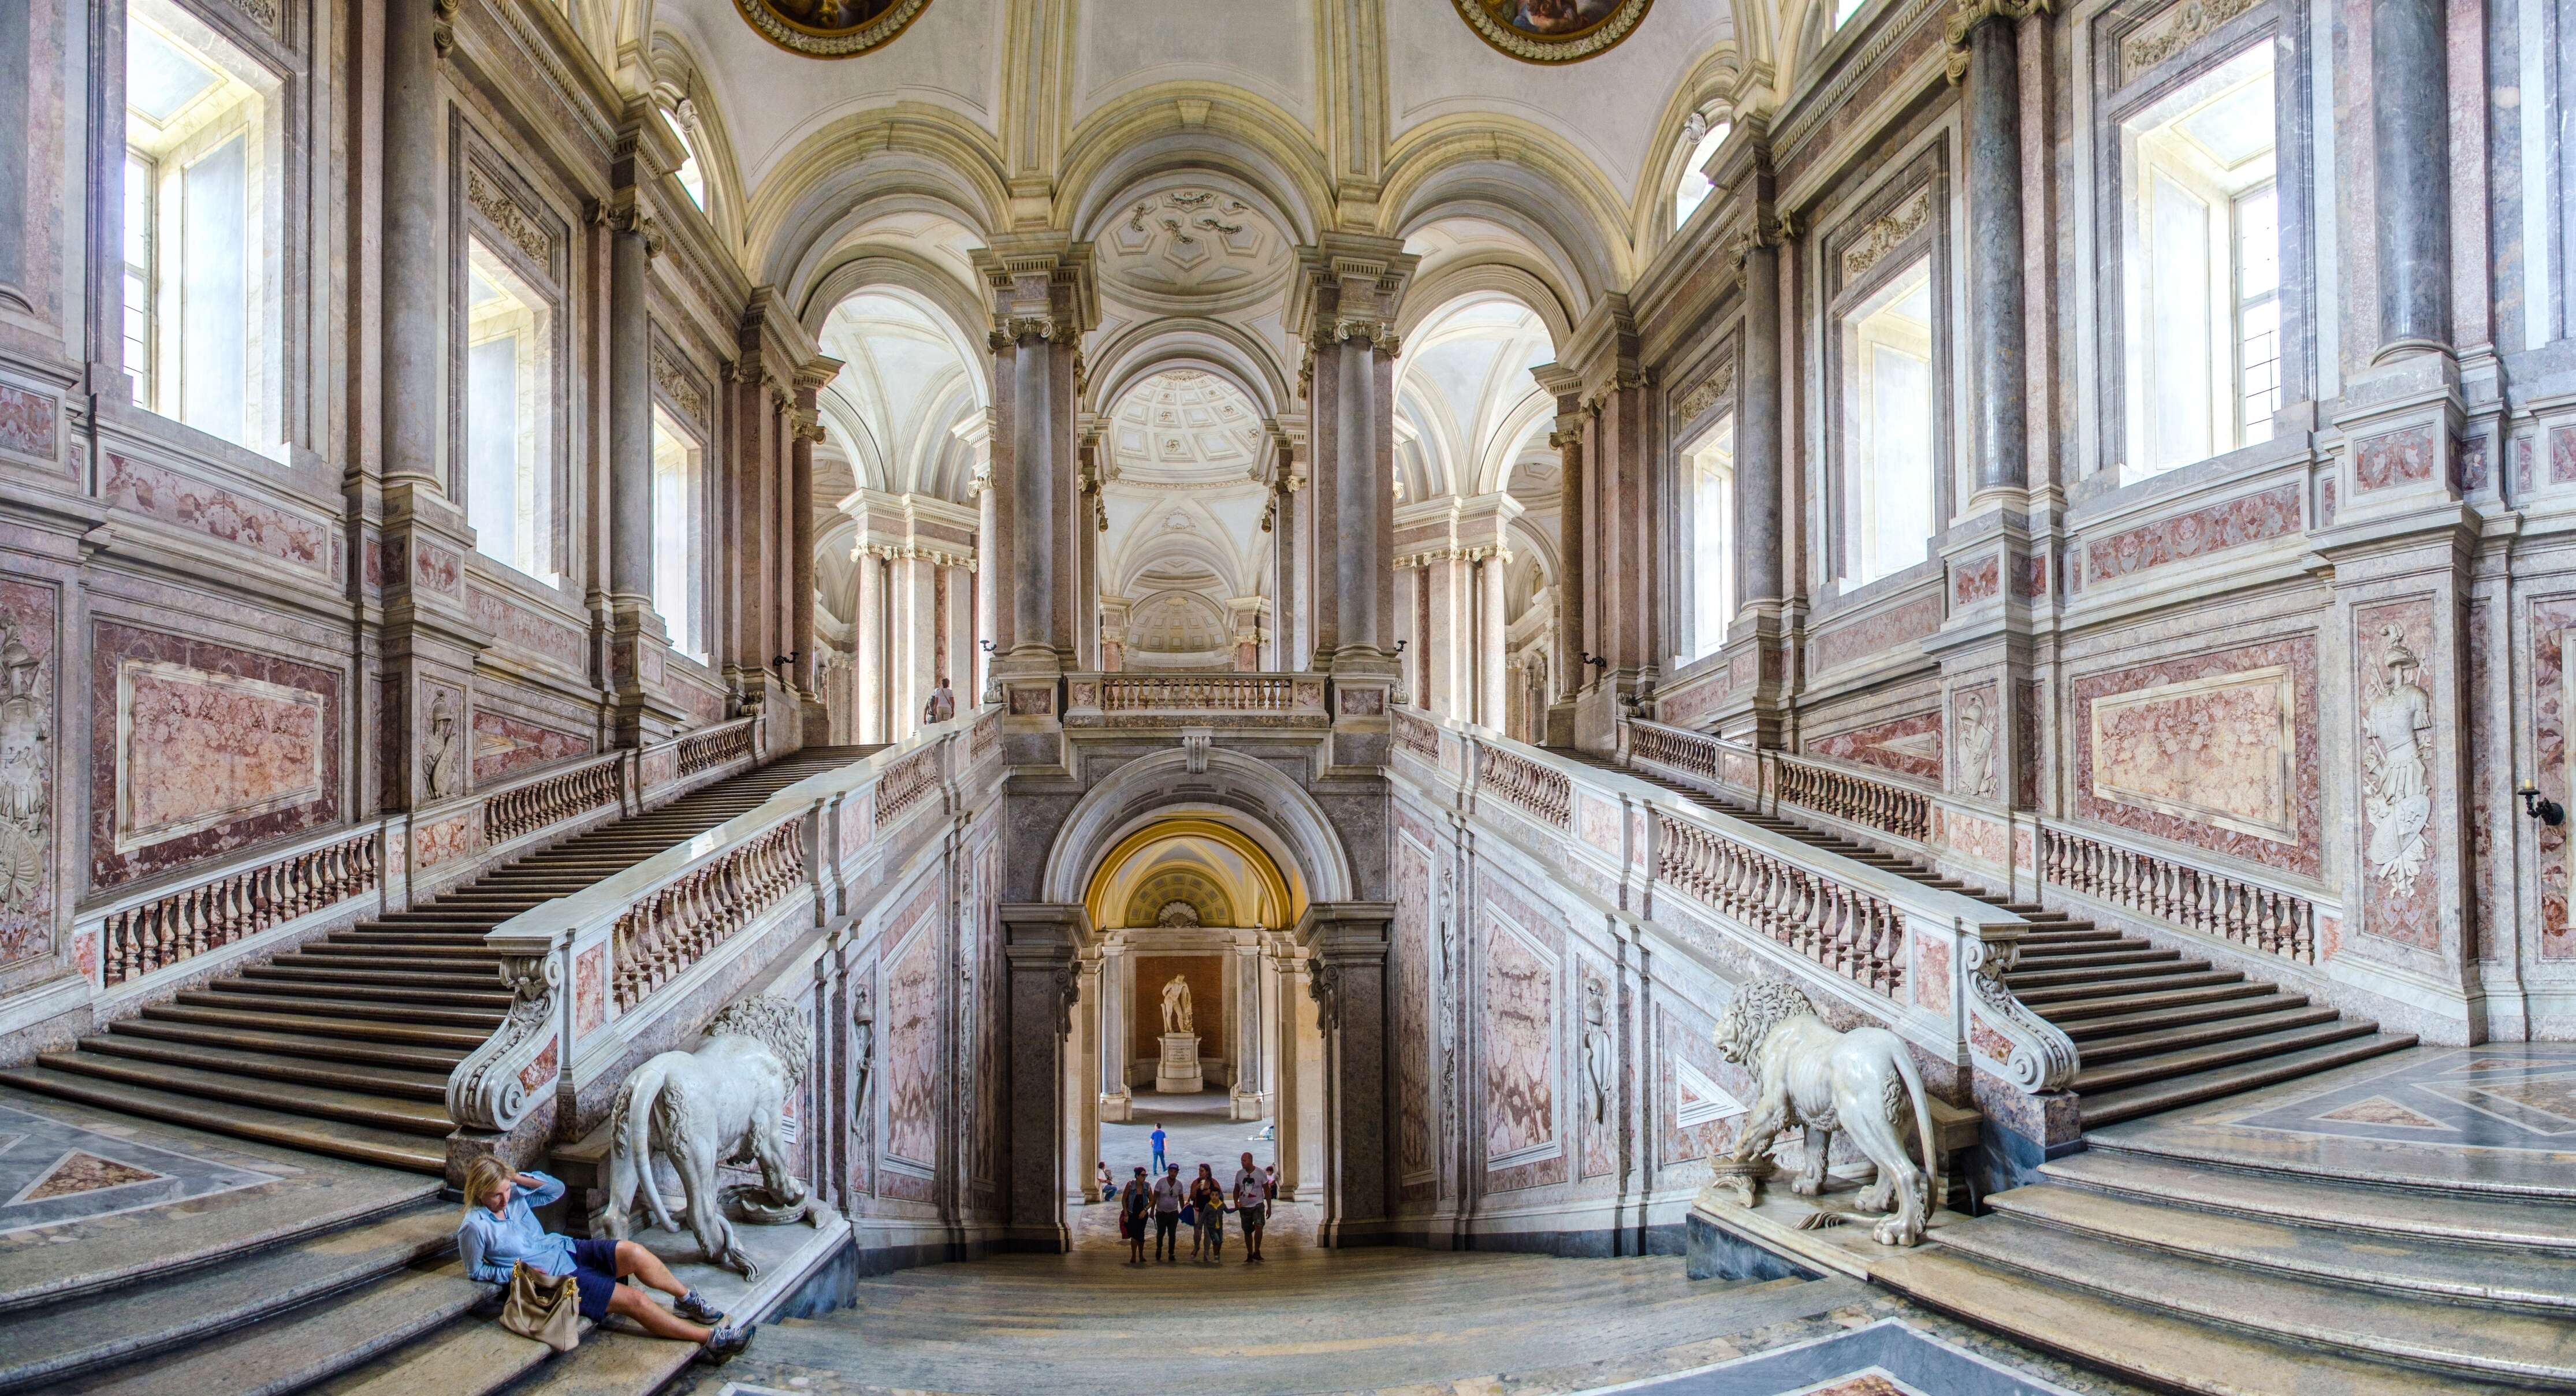 people sit on a double staircase in an ornate Italian palace